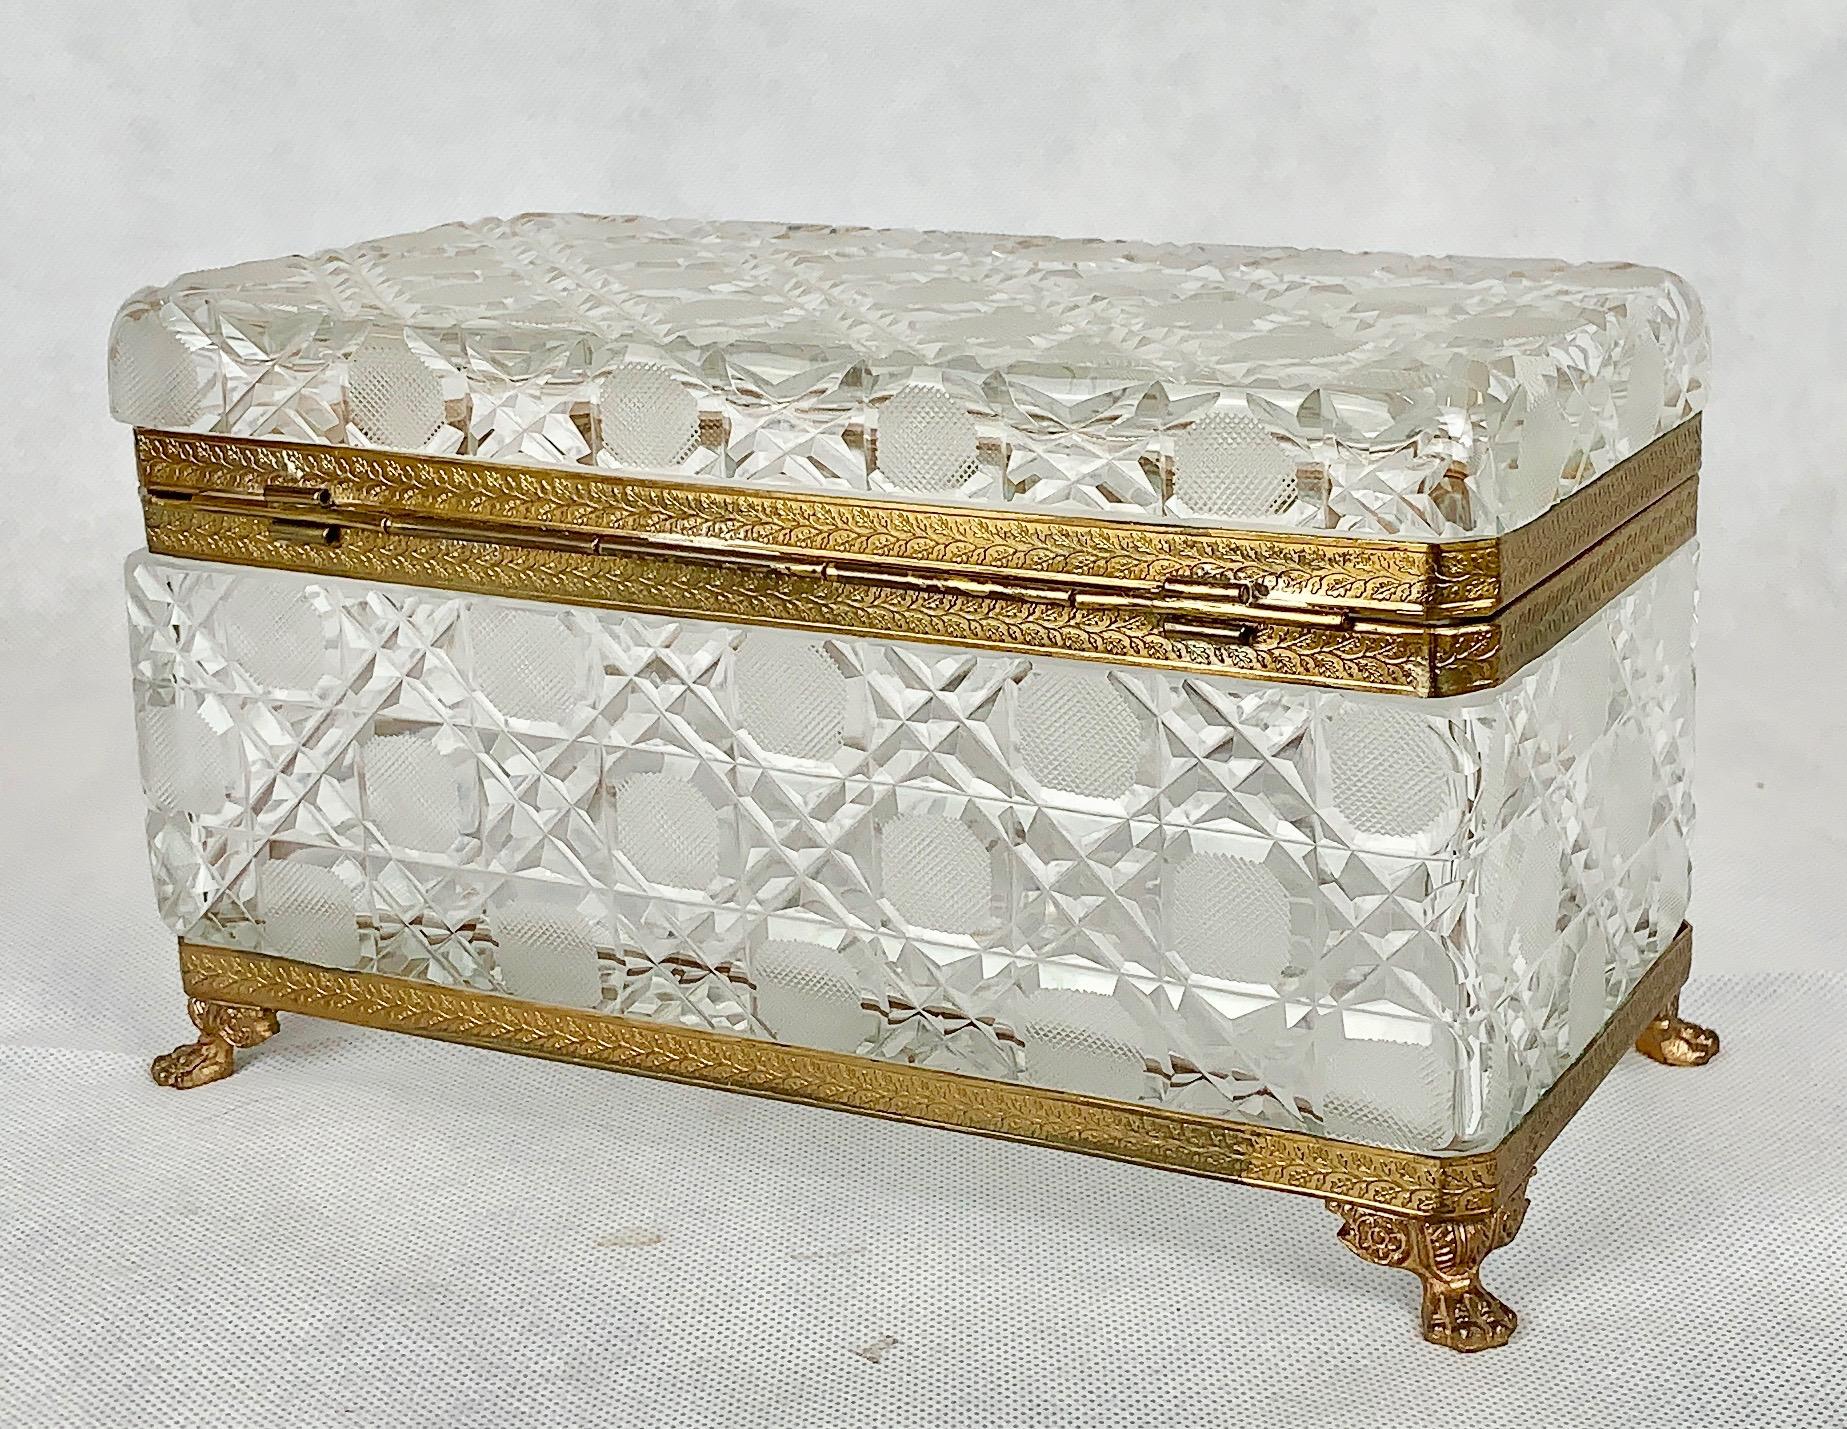 Large cane cut or hobnail crystal box with gilt frame. The frame has a pattern of branches and leaves. The feet are lion's paws and the bottom is star cut. This box is in crystal clear condition.
Measures: 10